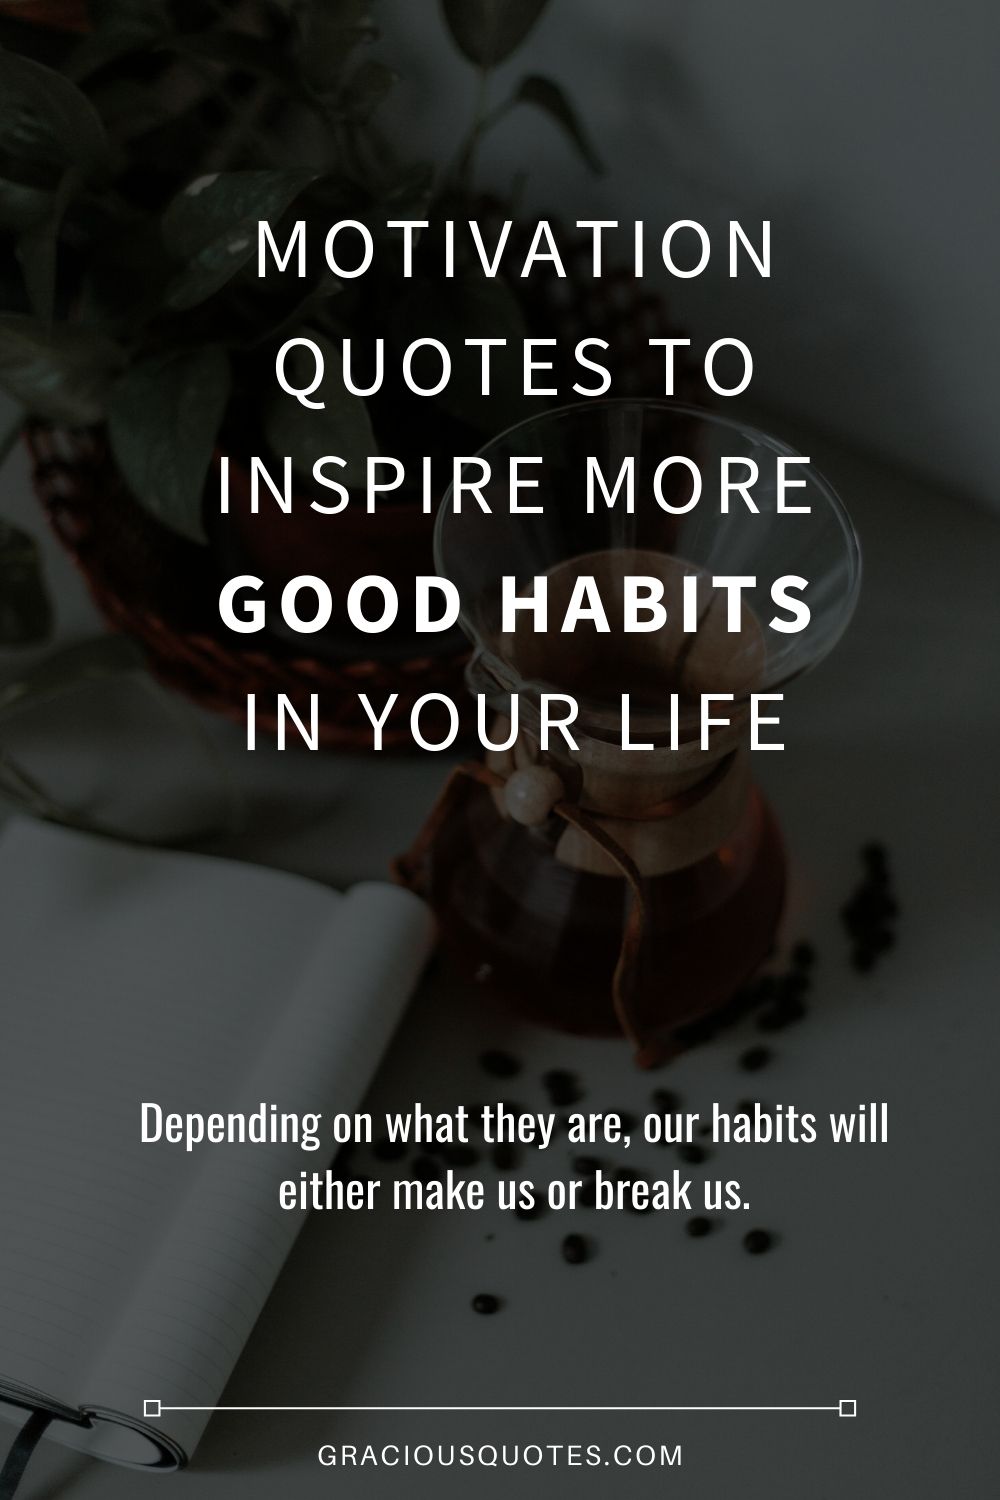 Motivation-Quotes-to-Inspire-More-Good-Habits-in-Your-Life-Gracious-Quotes